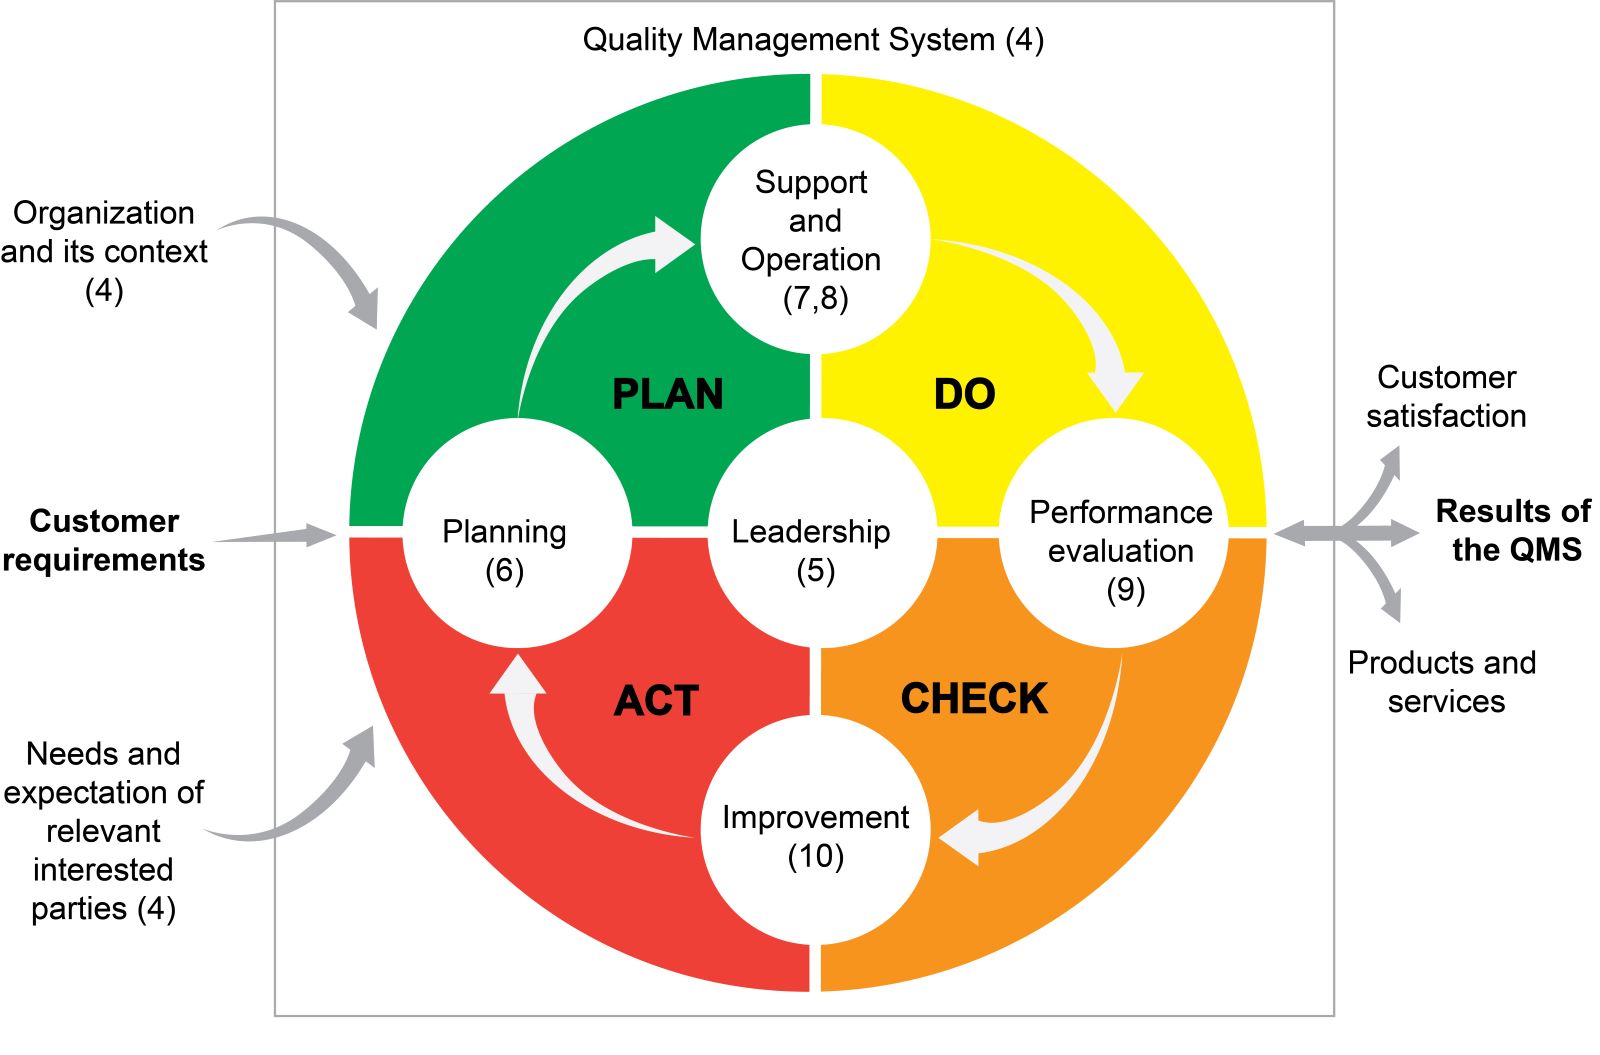 Structure of ISO 9001:2015 in the PDCA cycle